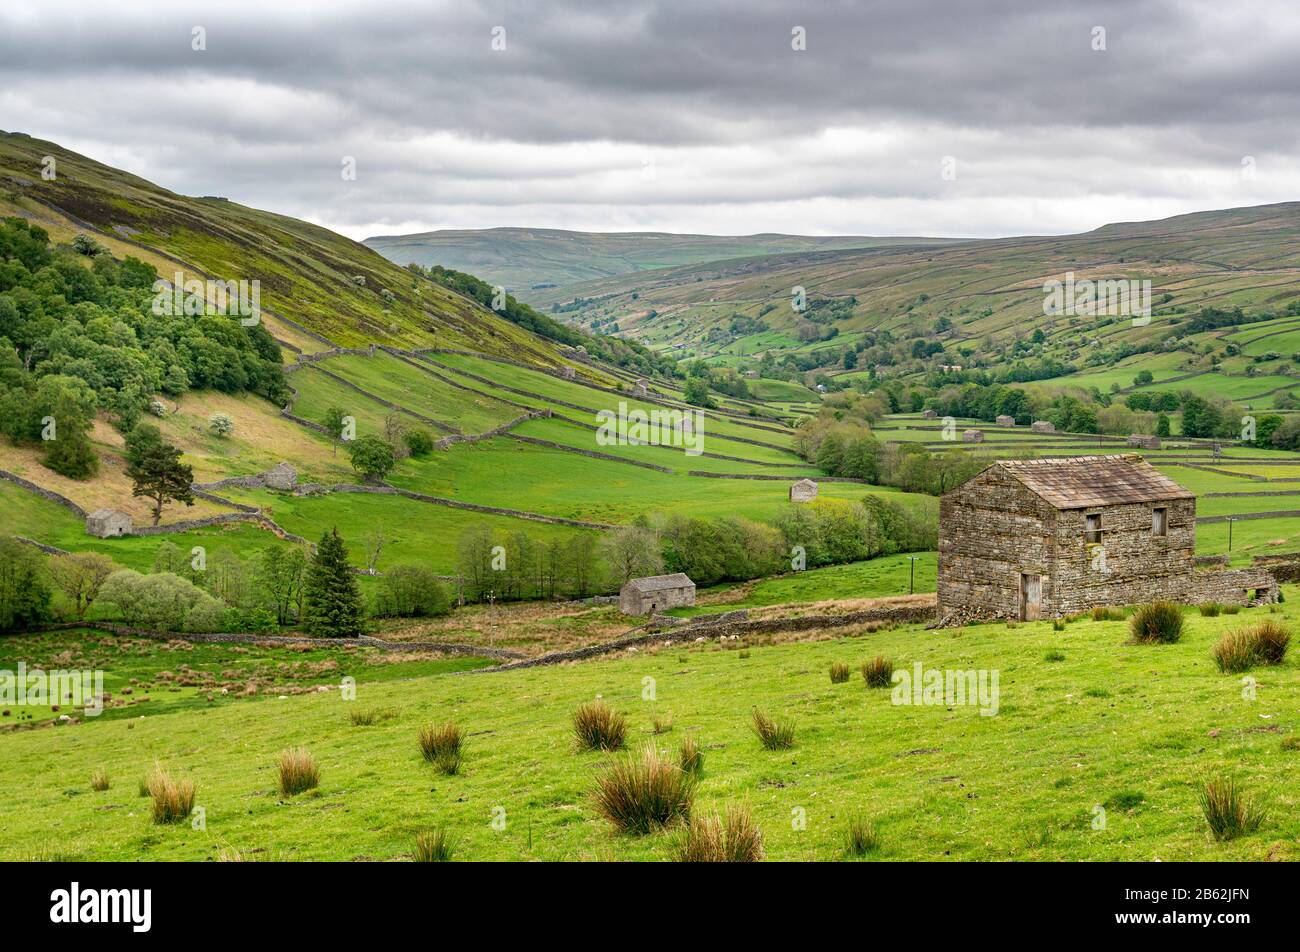 View looking down on traditional stone barns in Swaledale, near Thwaite, Yorkshire Dales National Park. Stock Photo